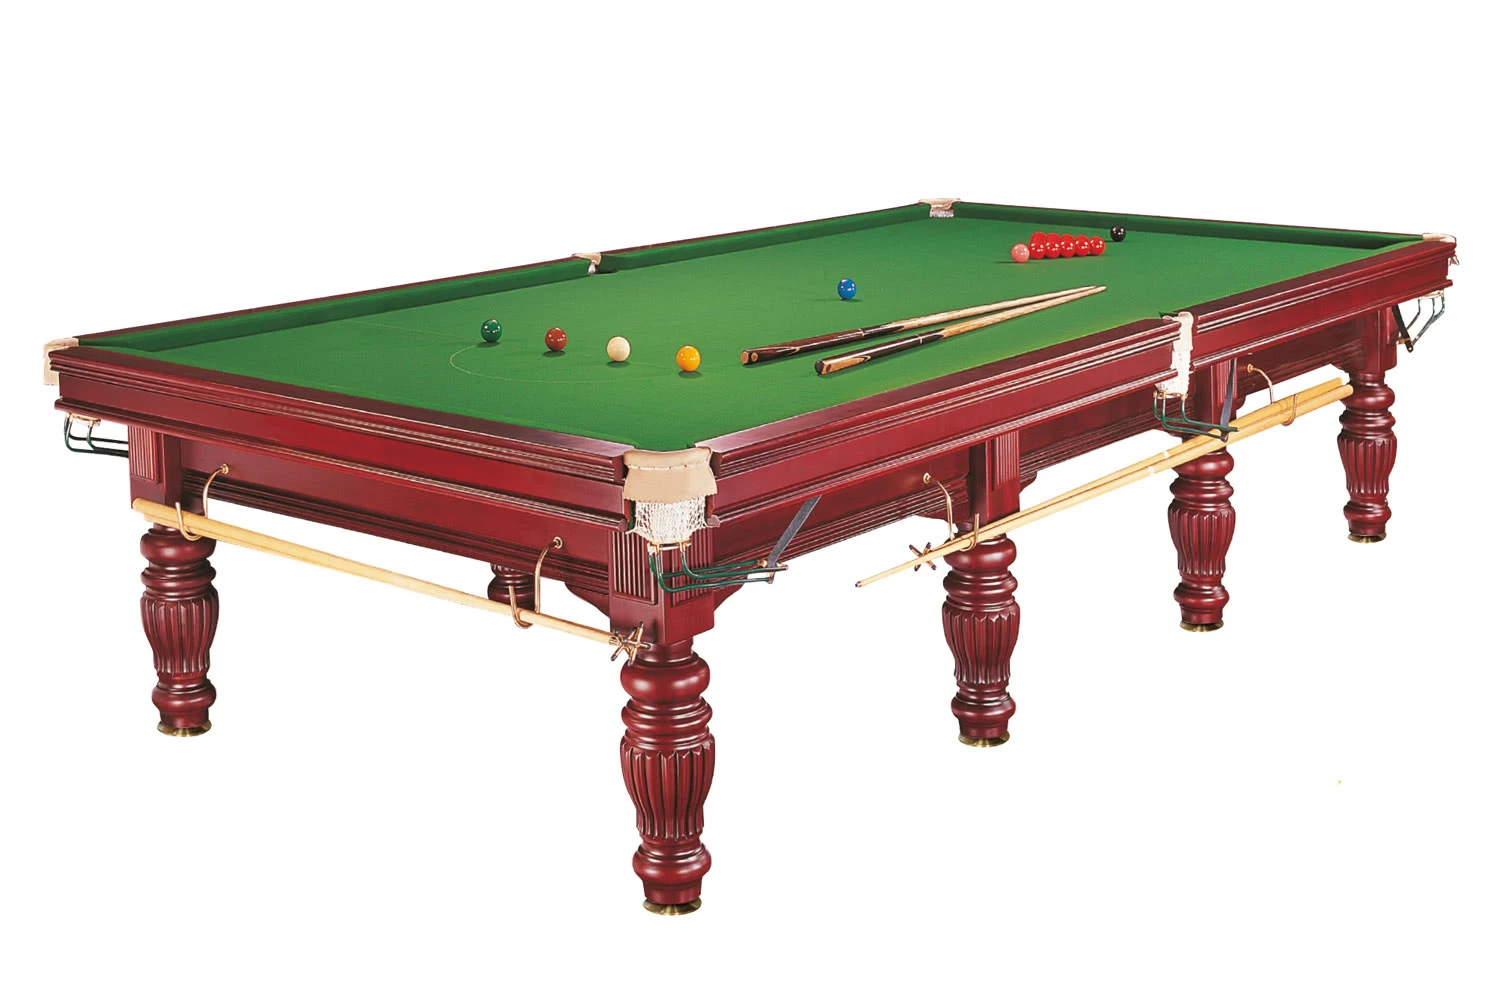 https://www.libertygames.co.uk/images/1/products/5347_dynamic-prince-snooker-table.webp